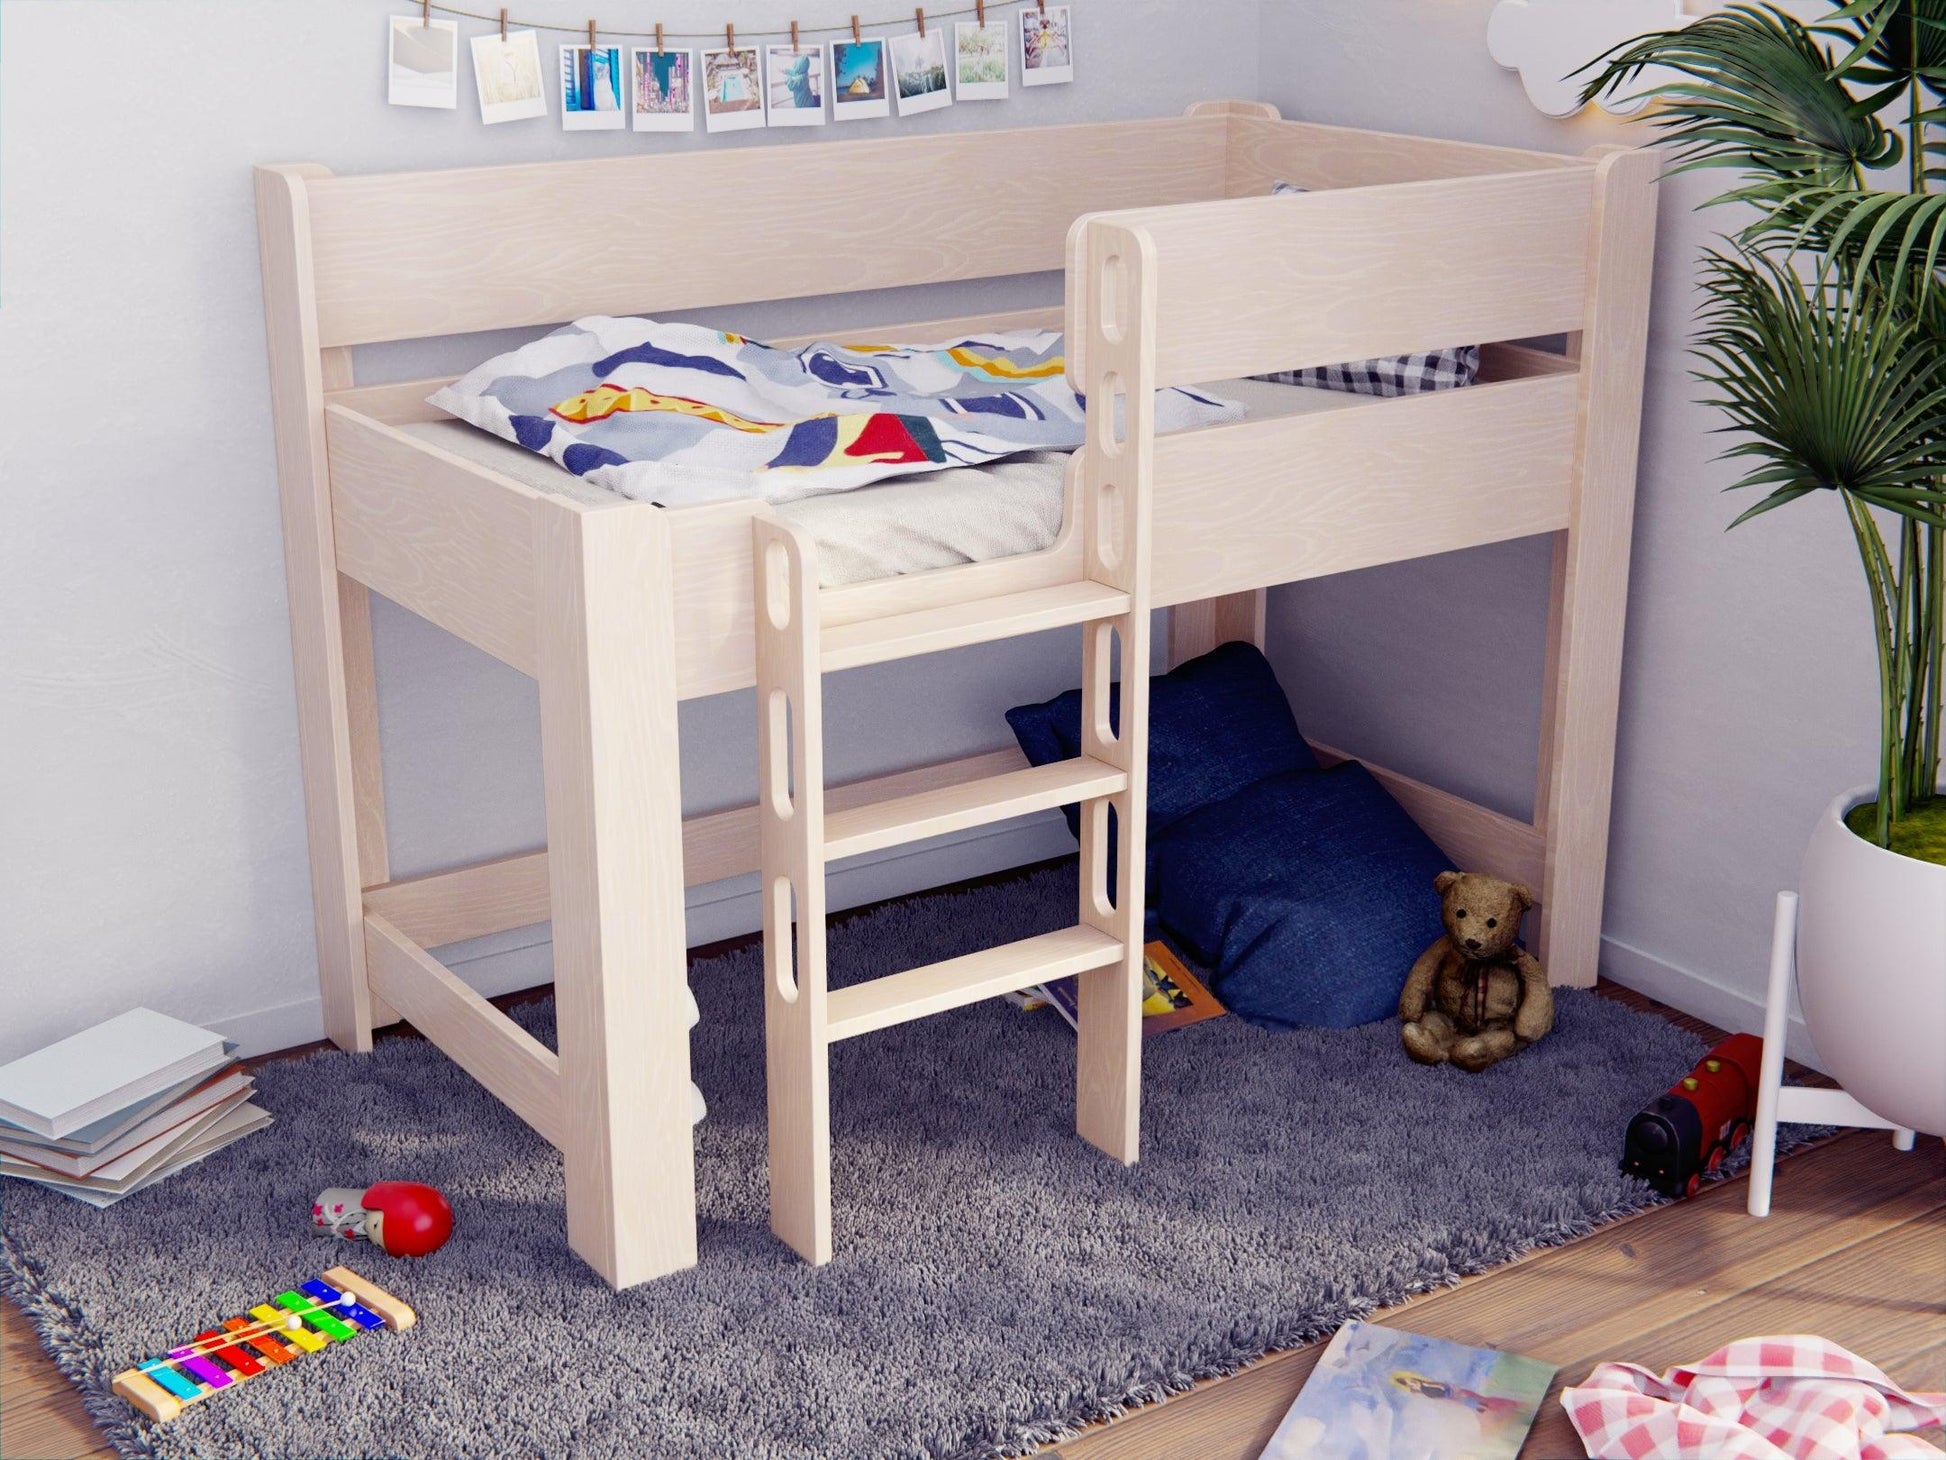 Delight in the rustic charm of our wooden low loft bed. Perfect for a dream-filled childhood.